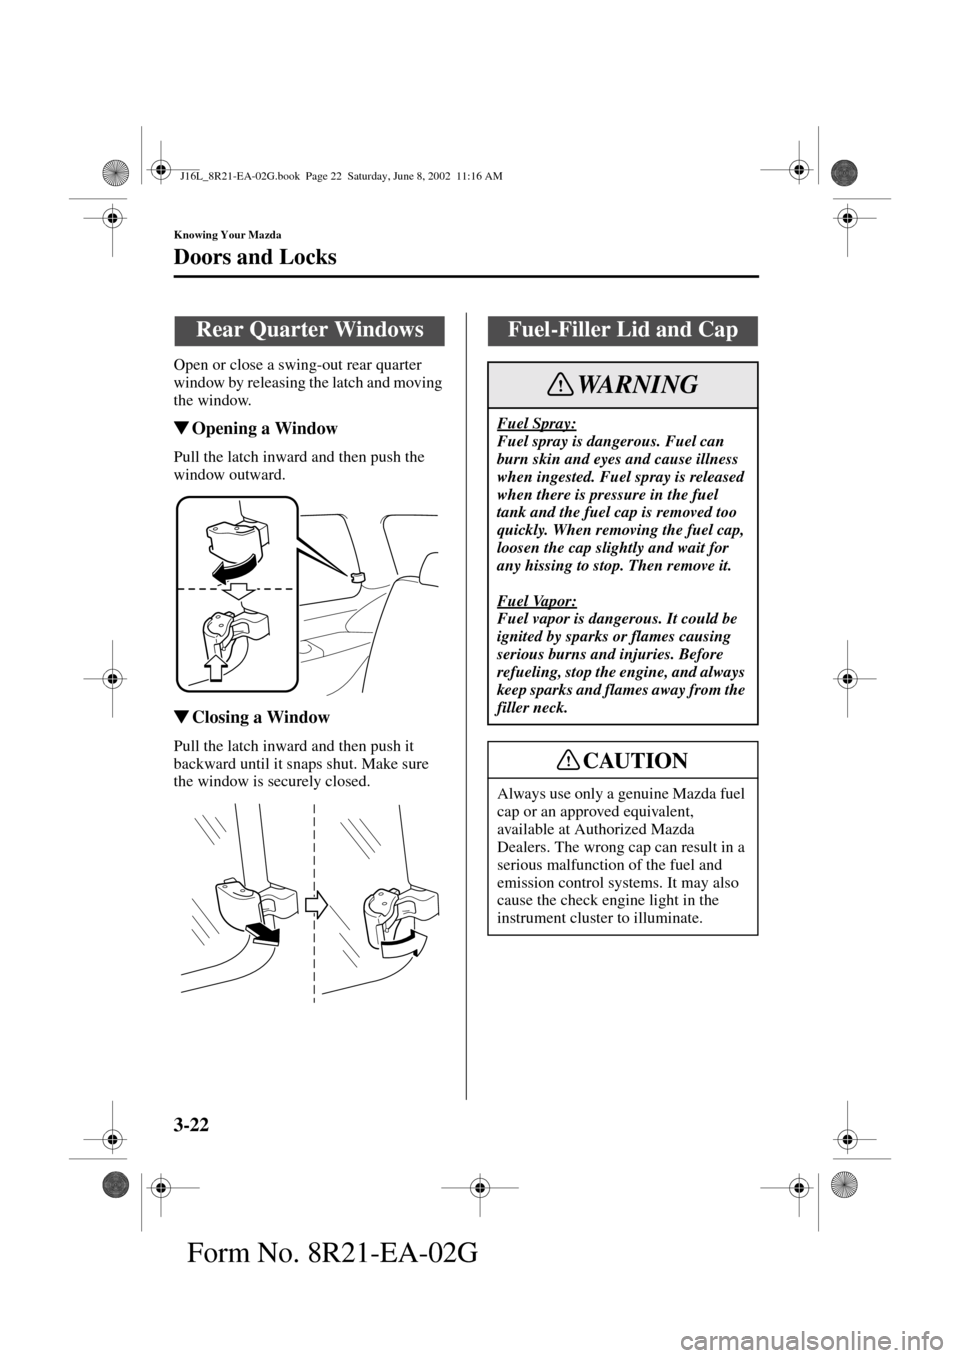 MAZDA MODEL MPV 2003  Owners Manual (in English) 3-22
Knowing Your Mazda
Doors and Locks
Form No. 8R21-EA-02G
Open or close a swing-out rear quarter 
window by releasing the latch and moving 
the window.
Opening a Window
Pull the latch inward and t